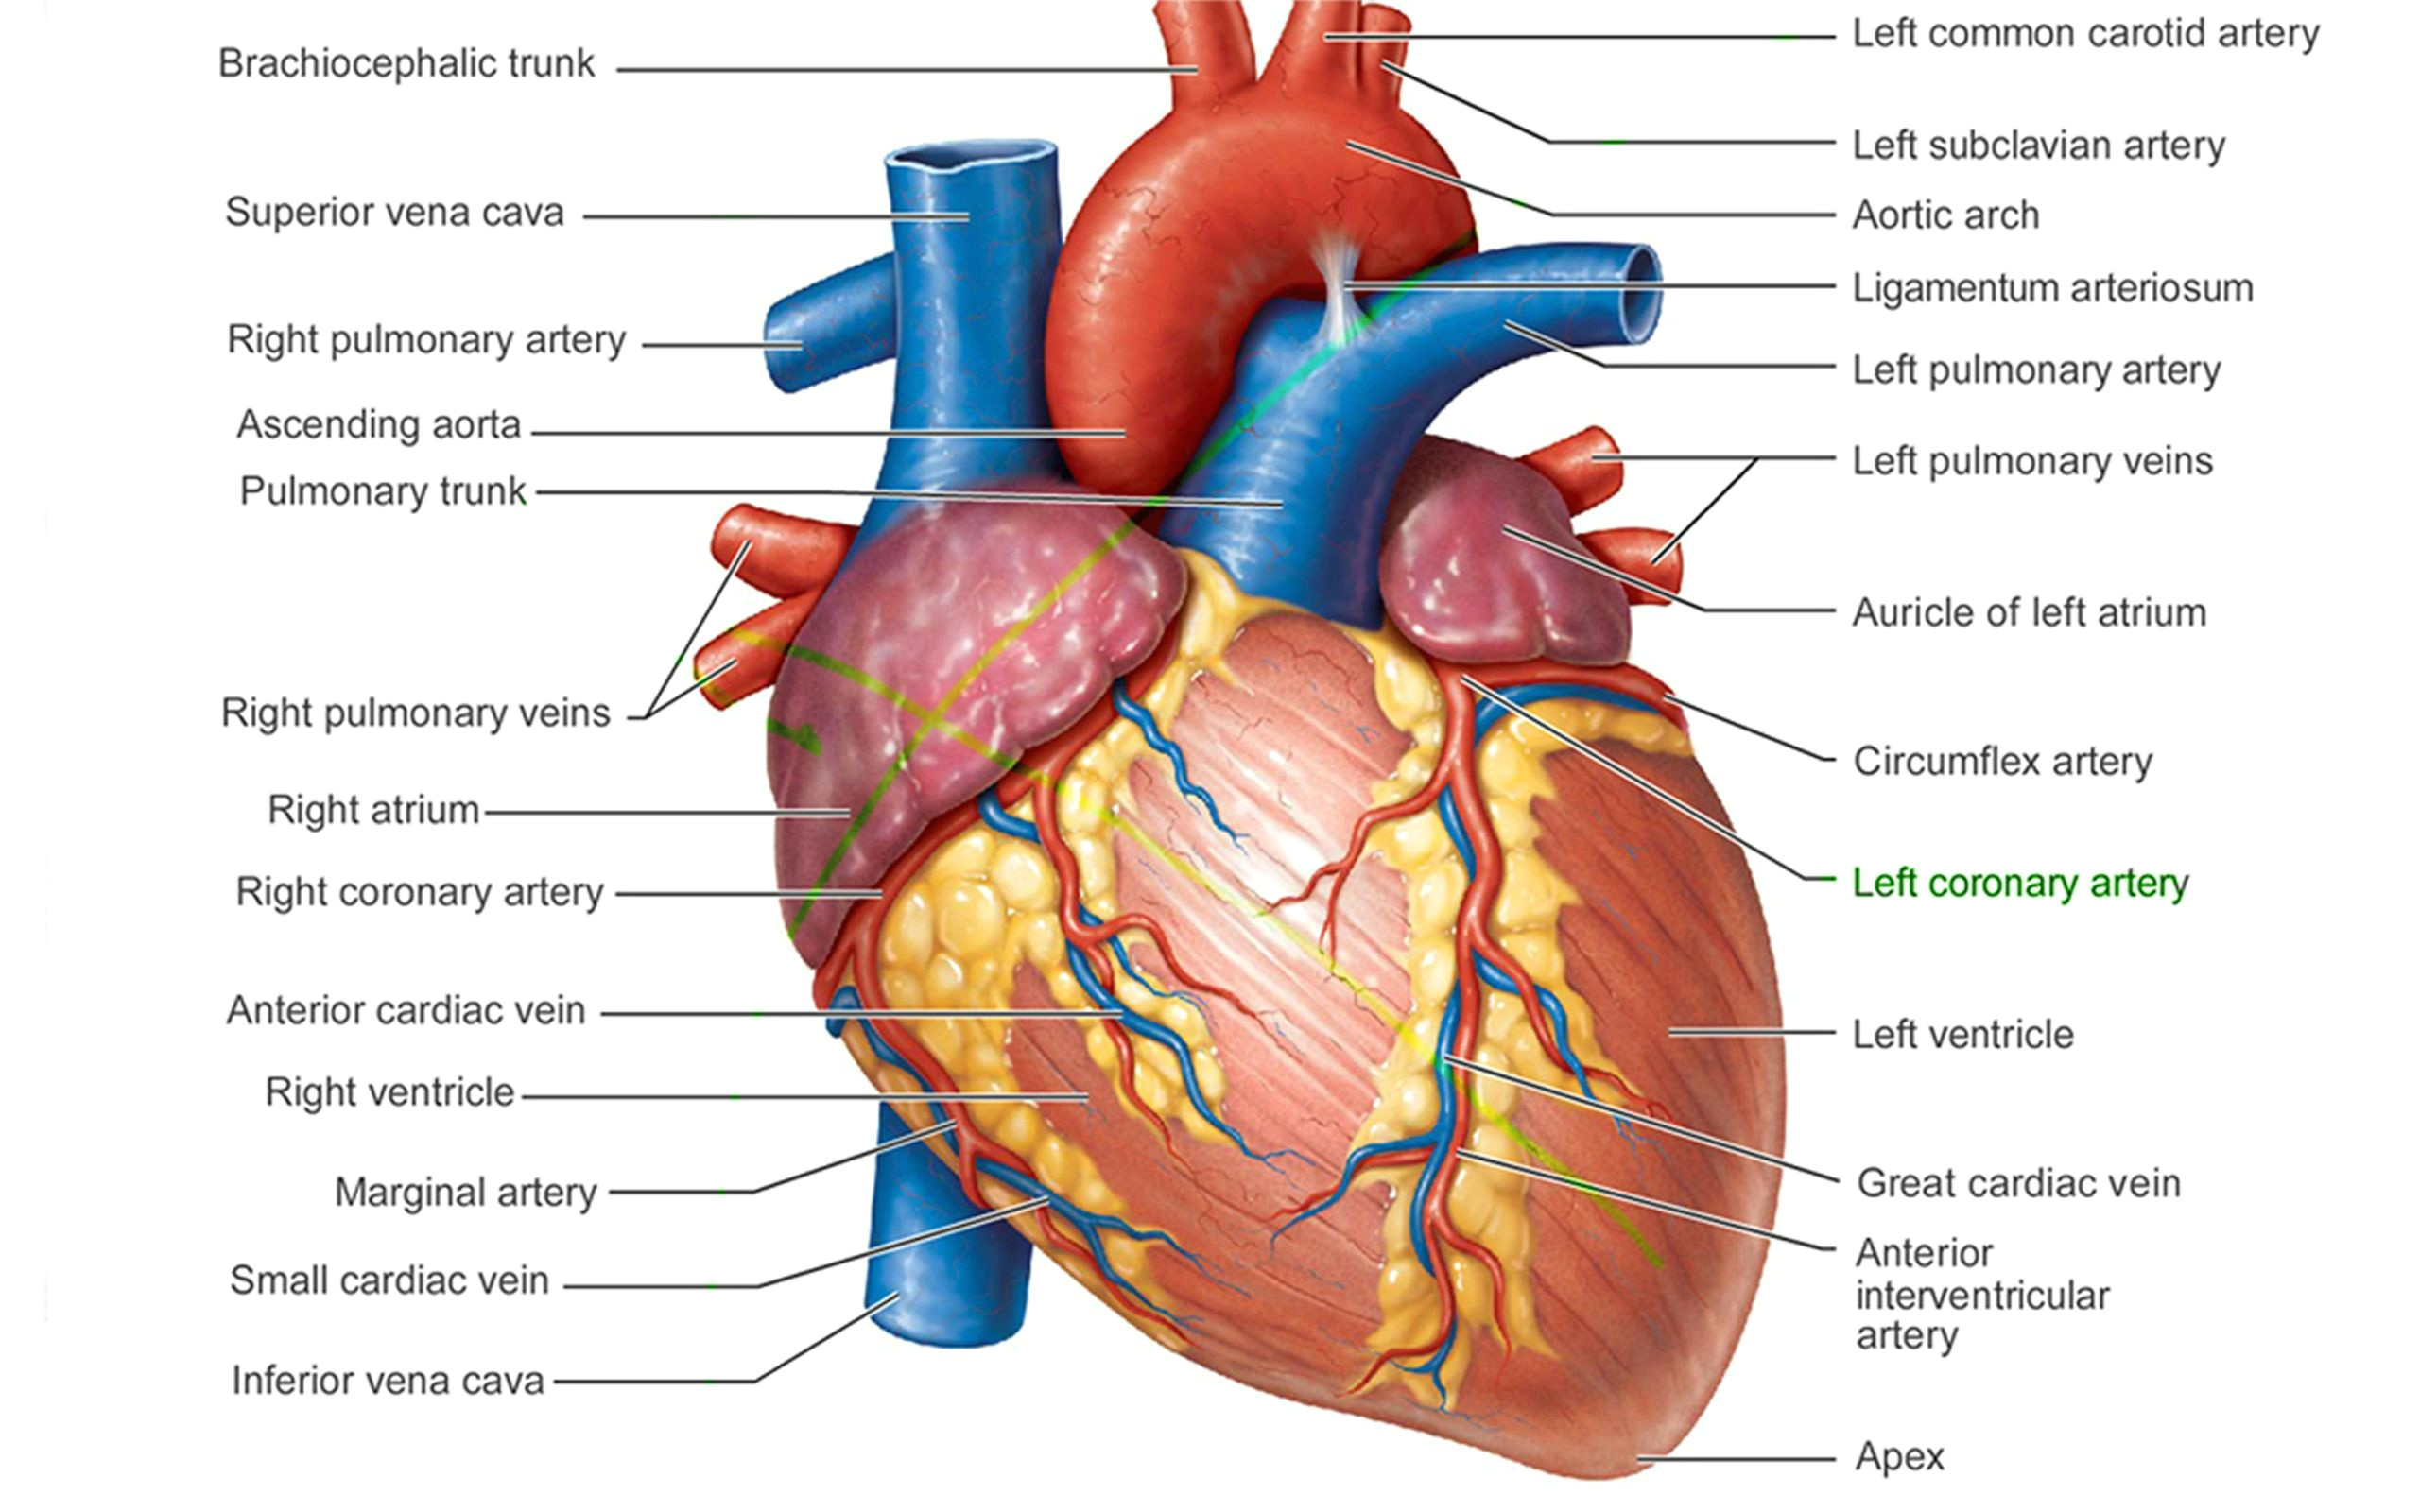 Drawing Of the Heart and Labels Pictures Of Human Heart Anatomy Anatomy Of the Human Heart 4k Ultra